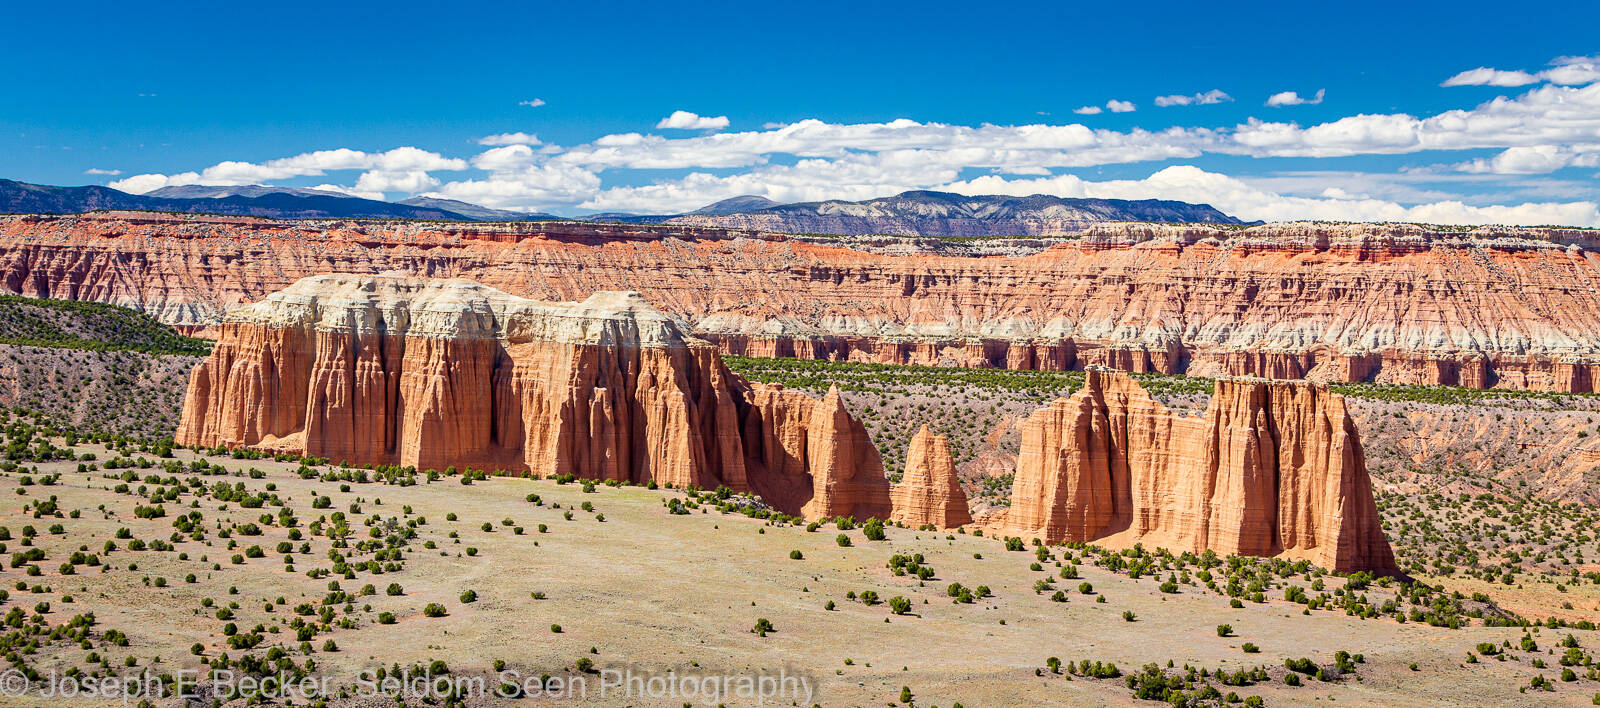 Image of Upper Cathedral Valley Overlook by Joe Becker